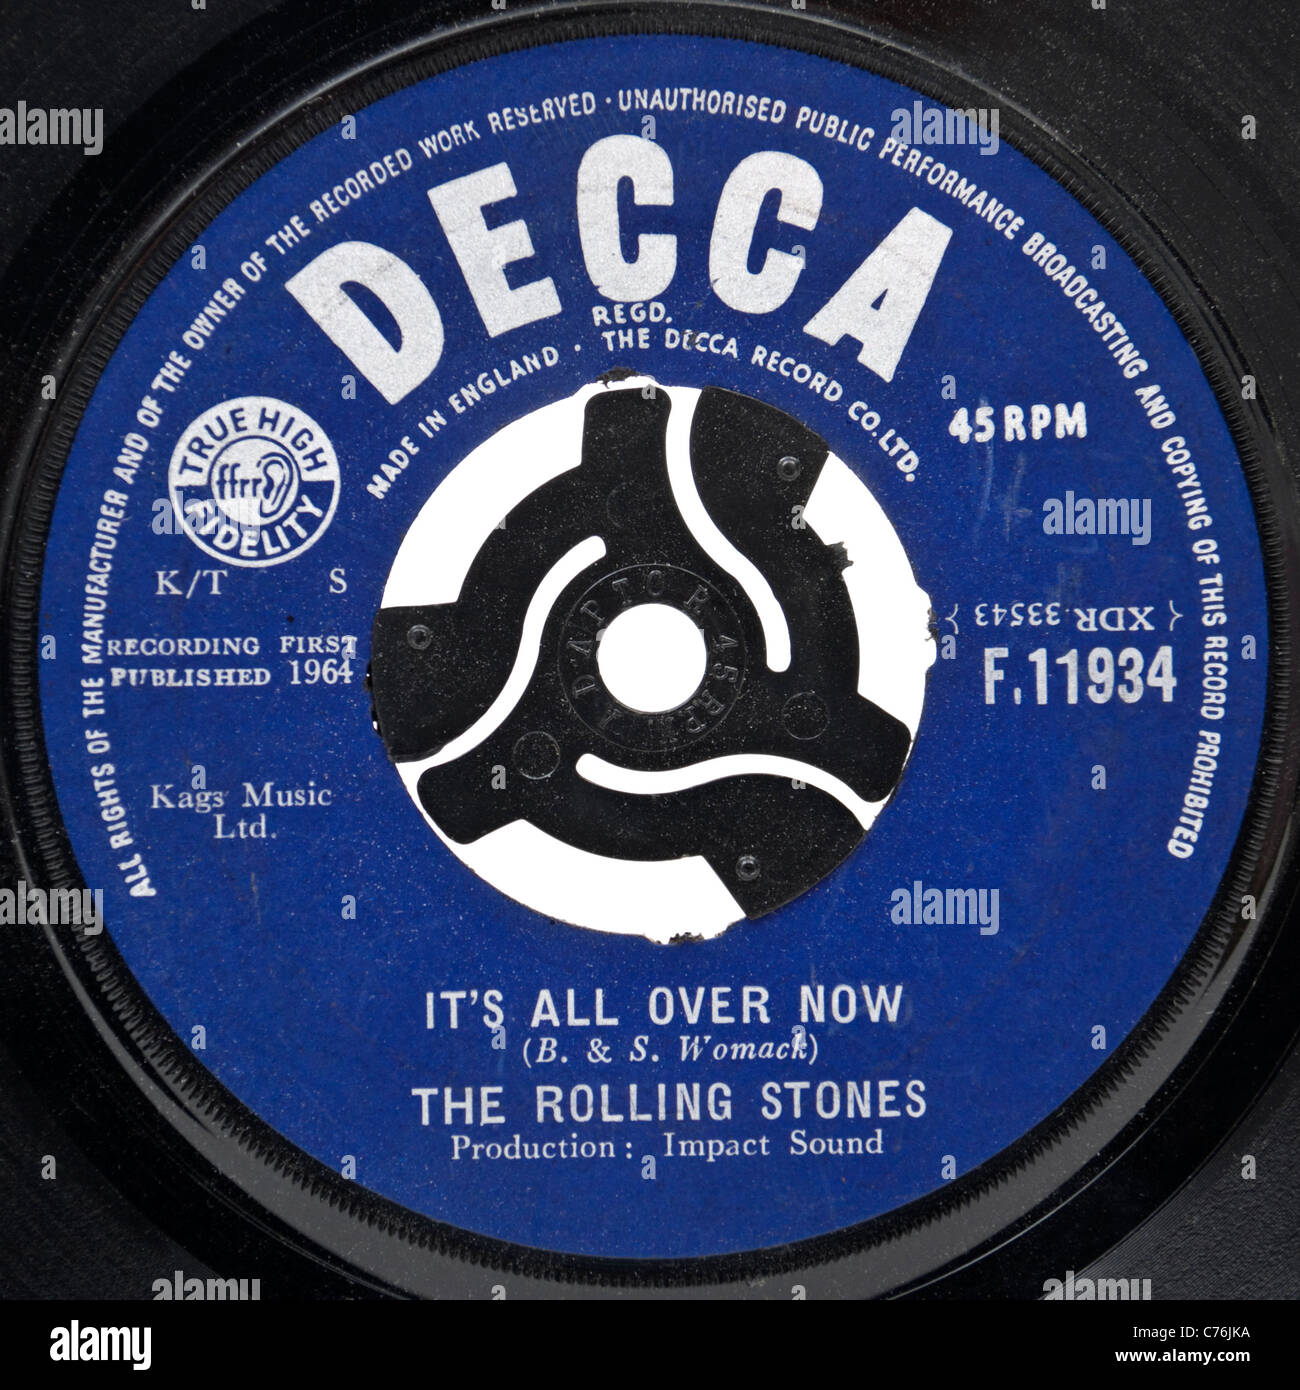 The Rolling Stones - It's All Over Now (7" vinyl record, 1964, Decca F11934  Stock Photo - Alamy